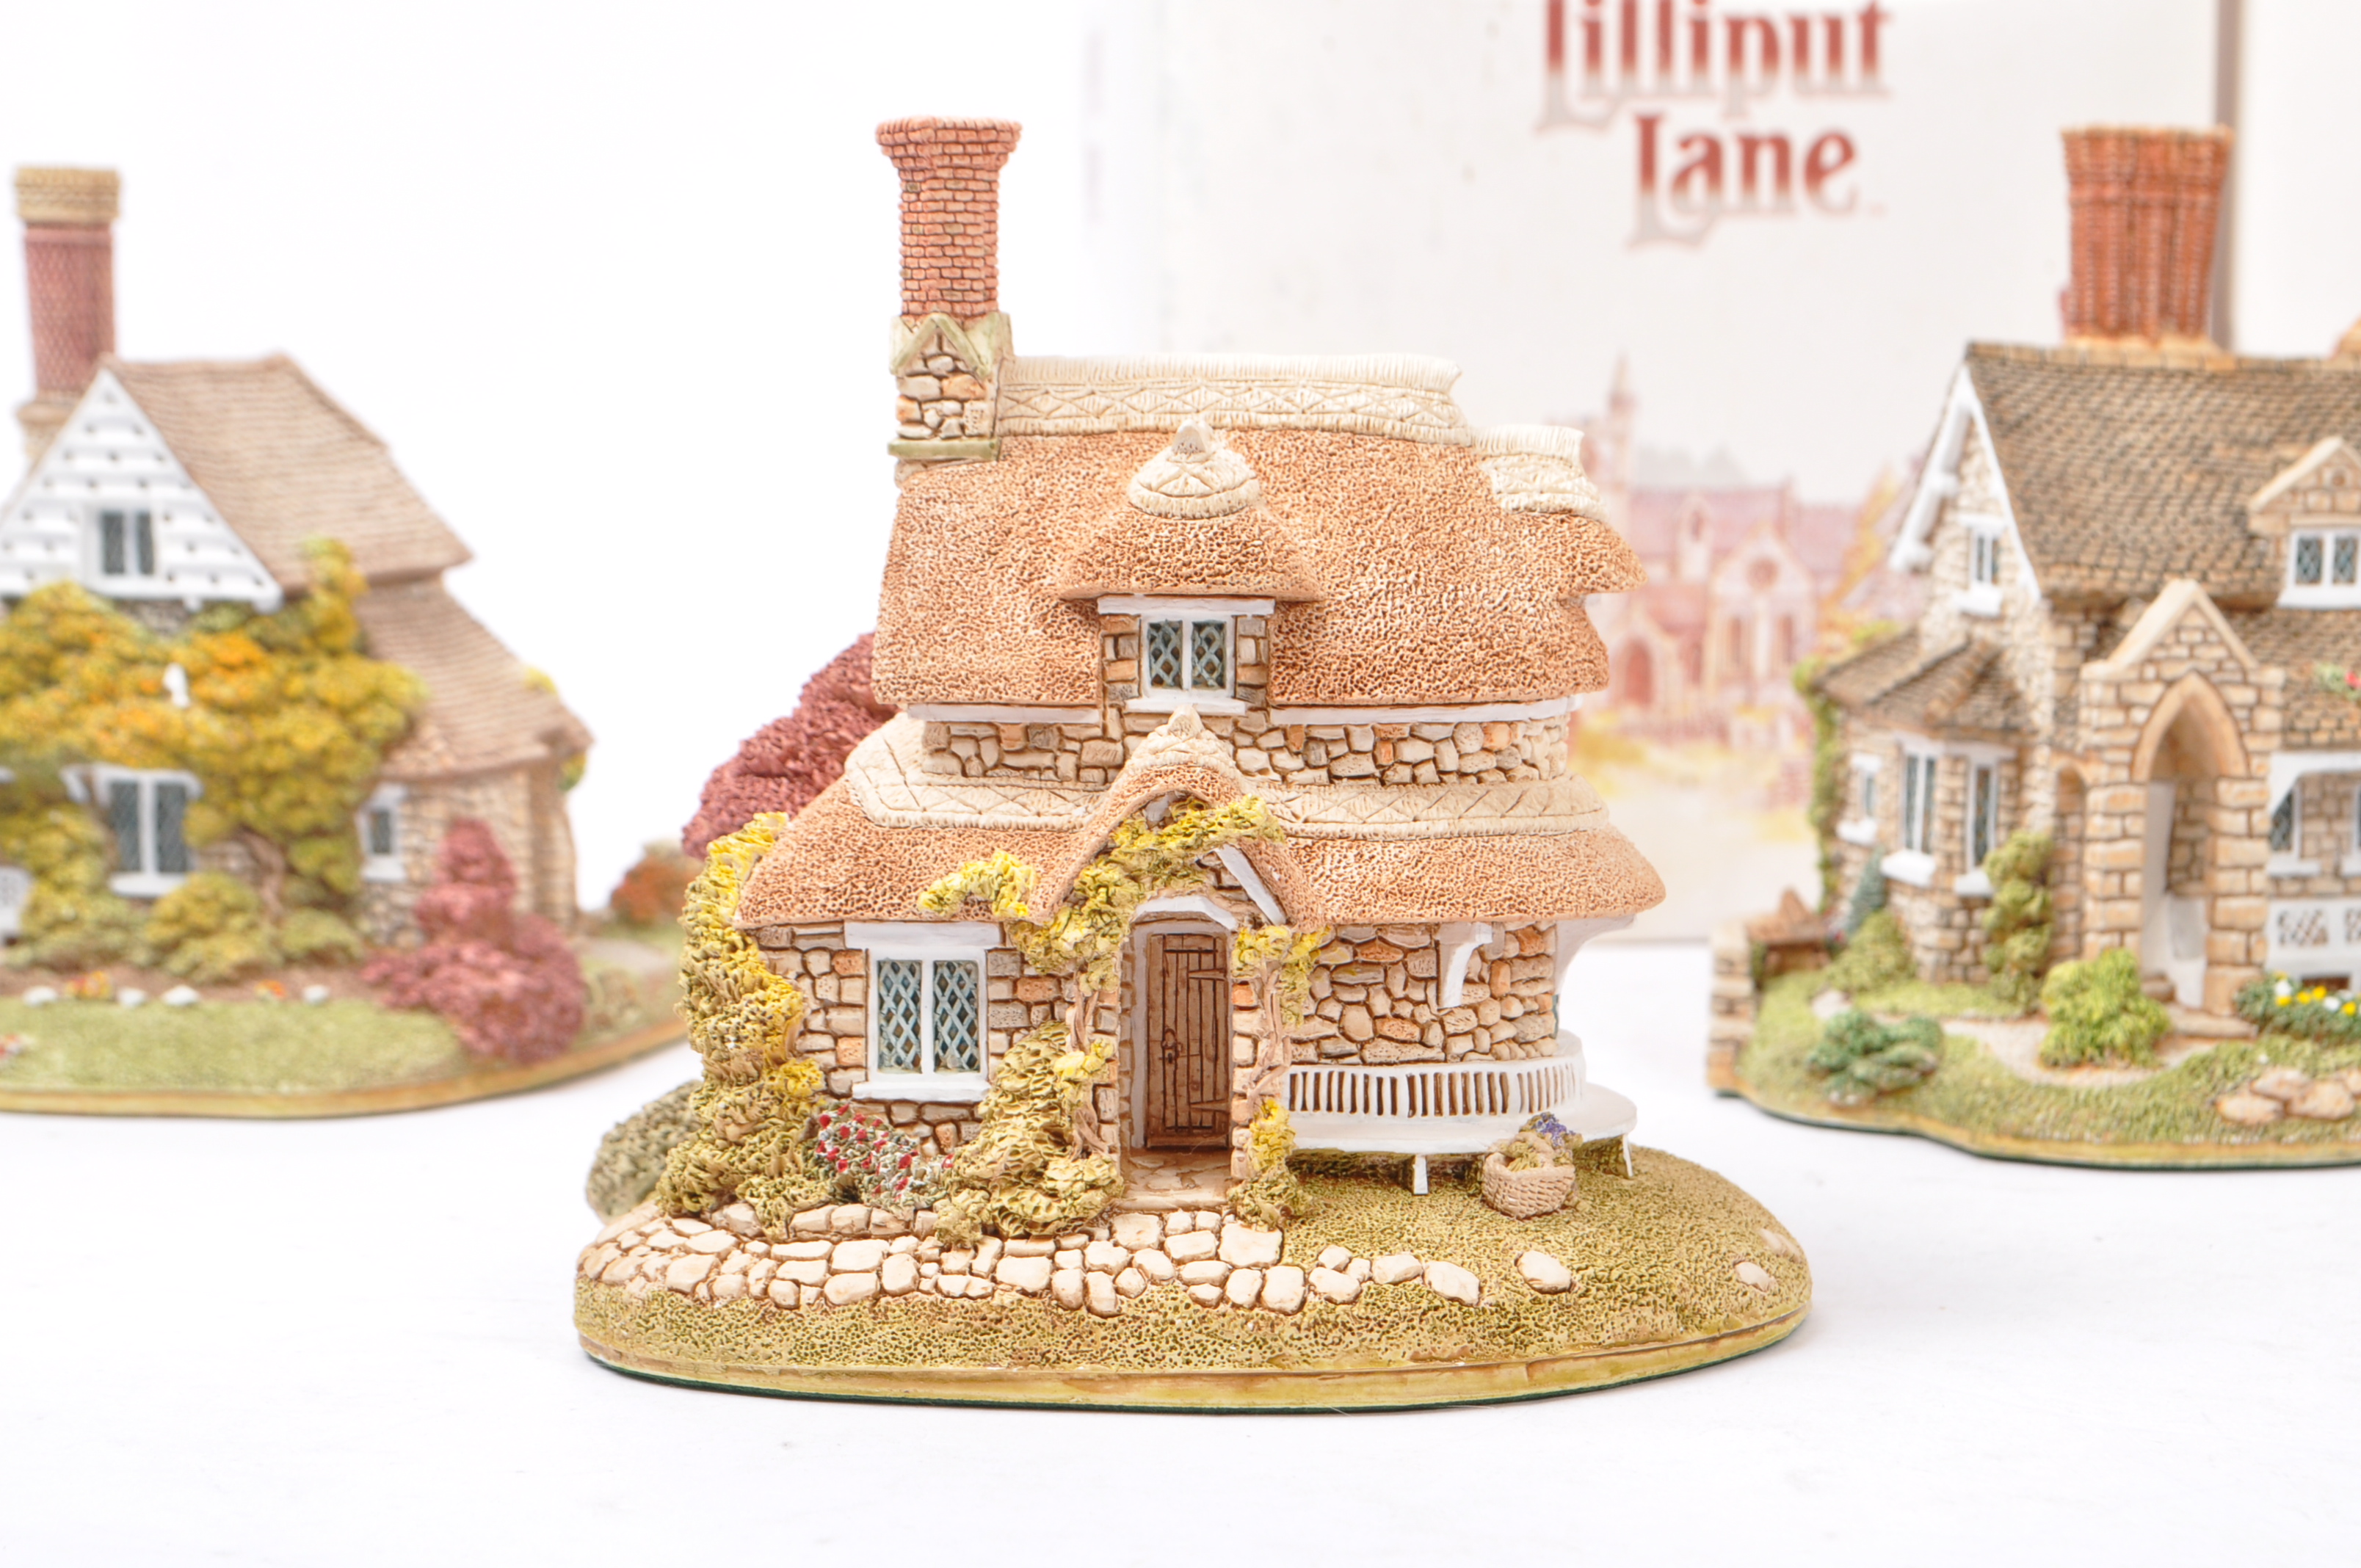 LILLIPUT LANE - COLLECTION OF HOUSE / COTTAGE RESIN FIGURINES - Image 7 of 9